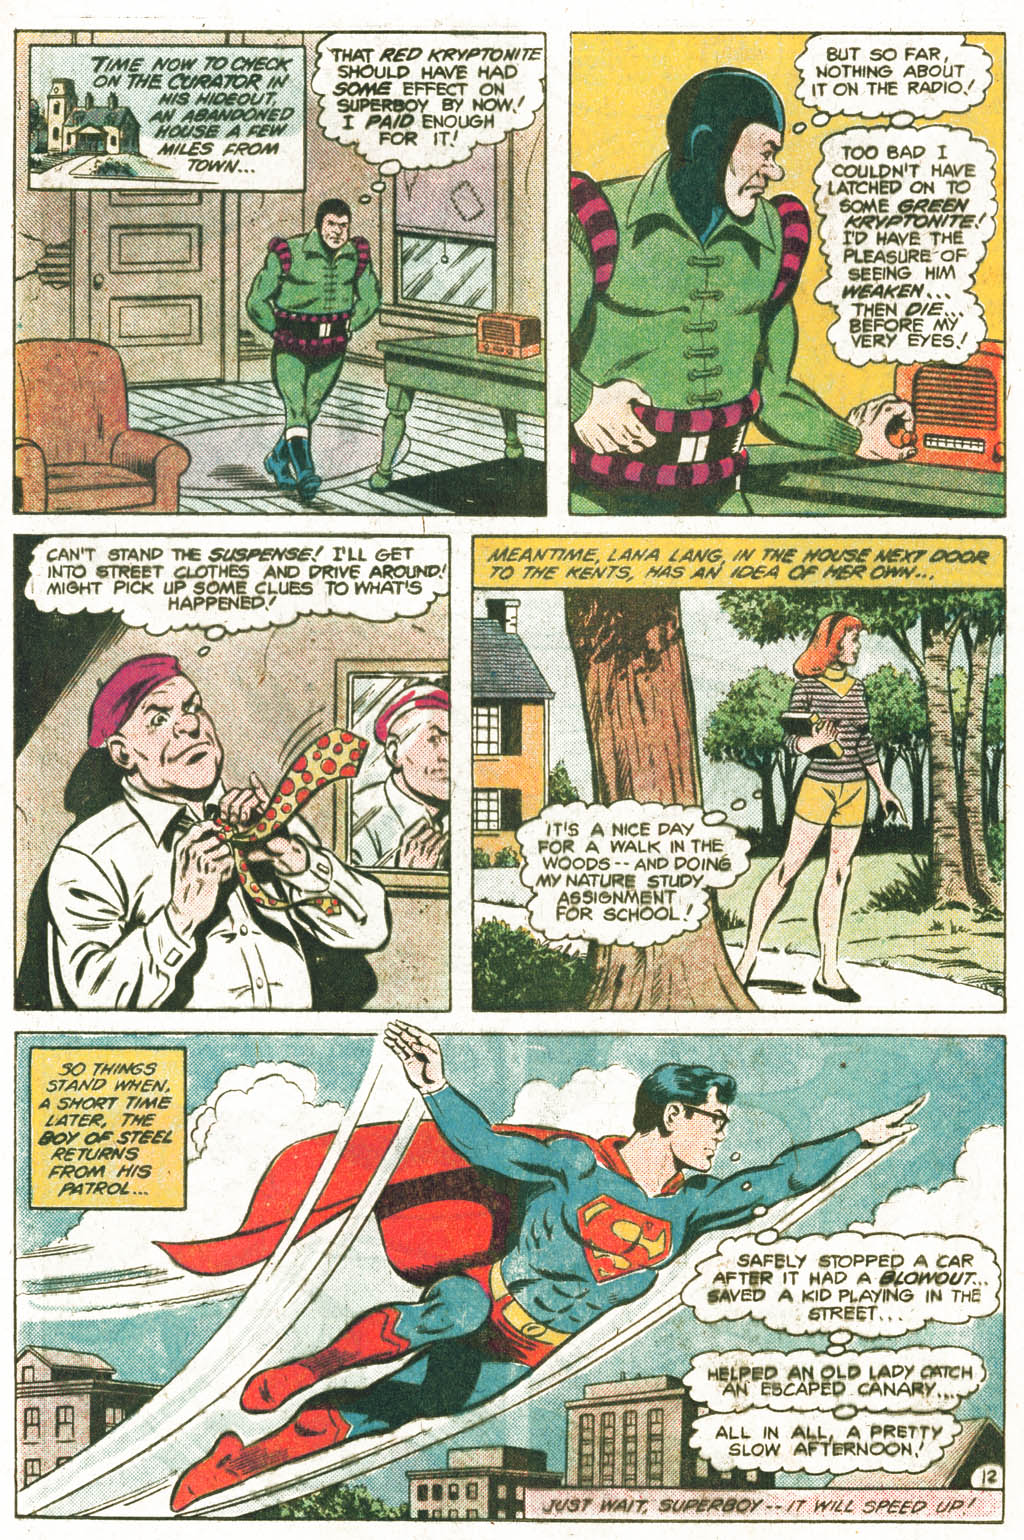 The New Adventures of Superboy 24 Page 12